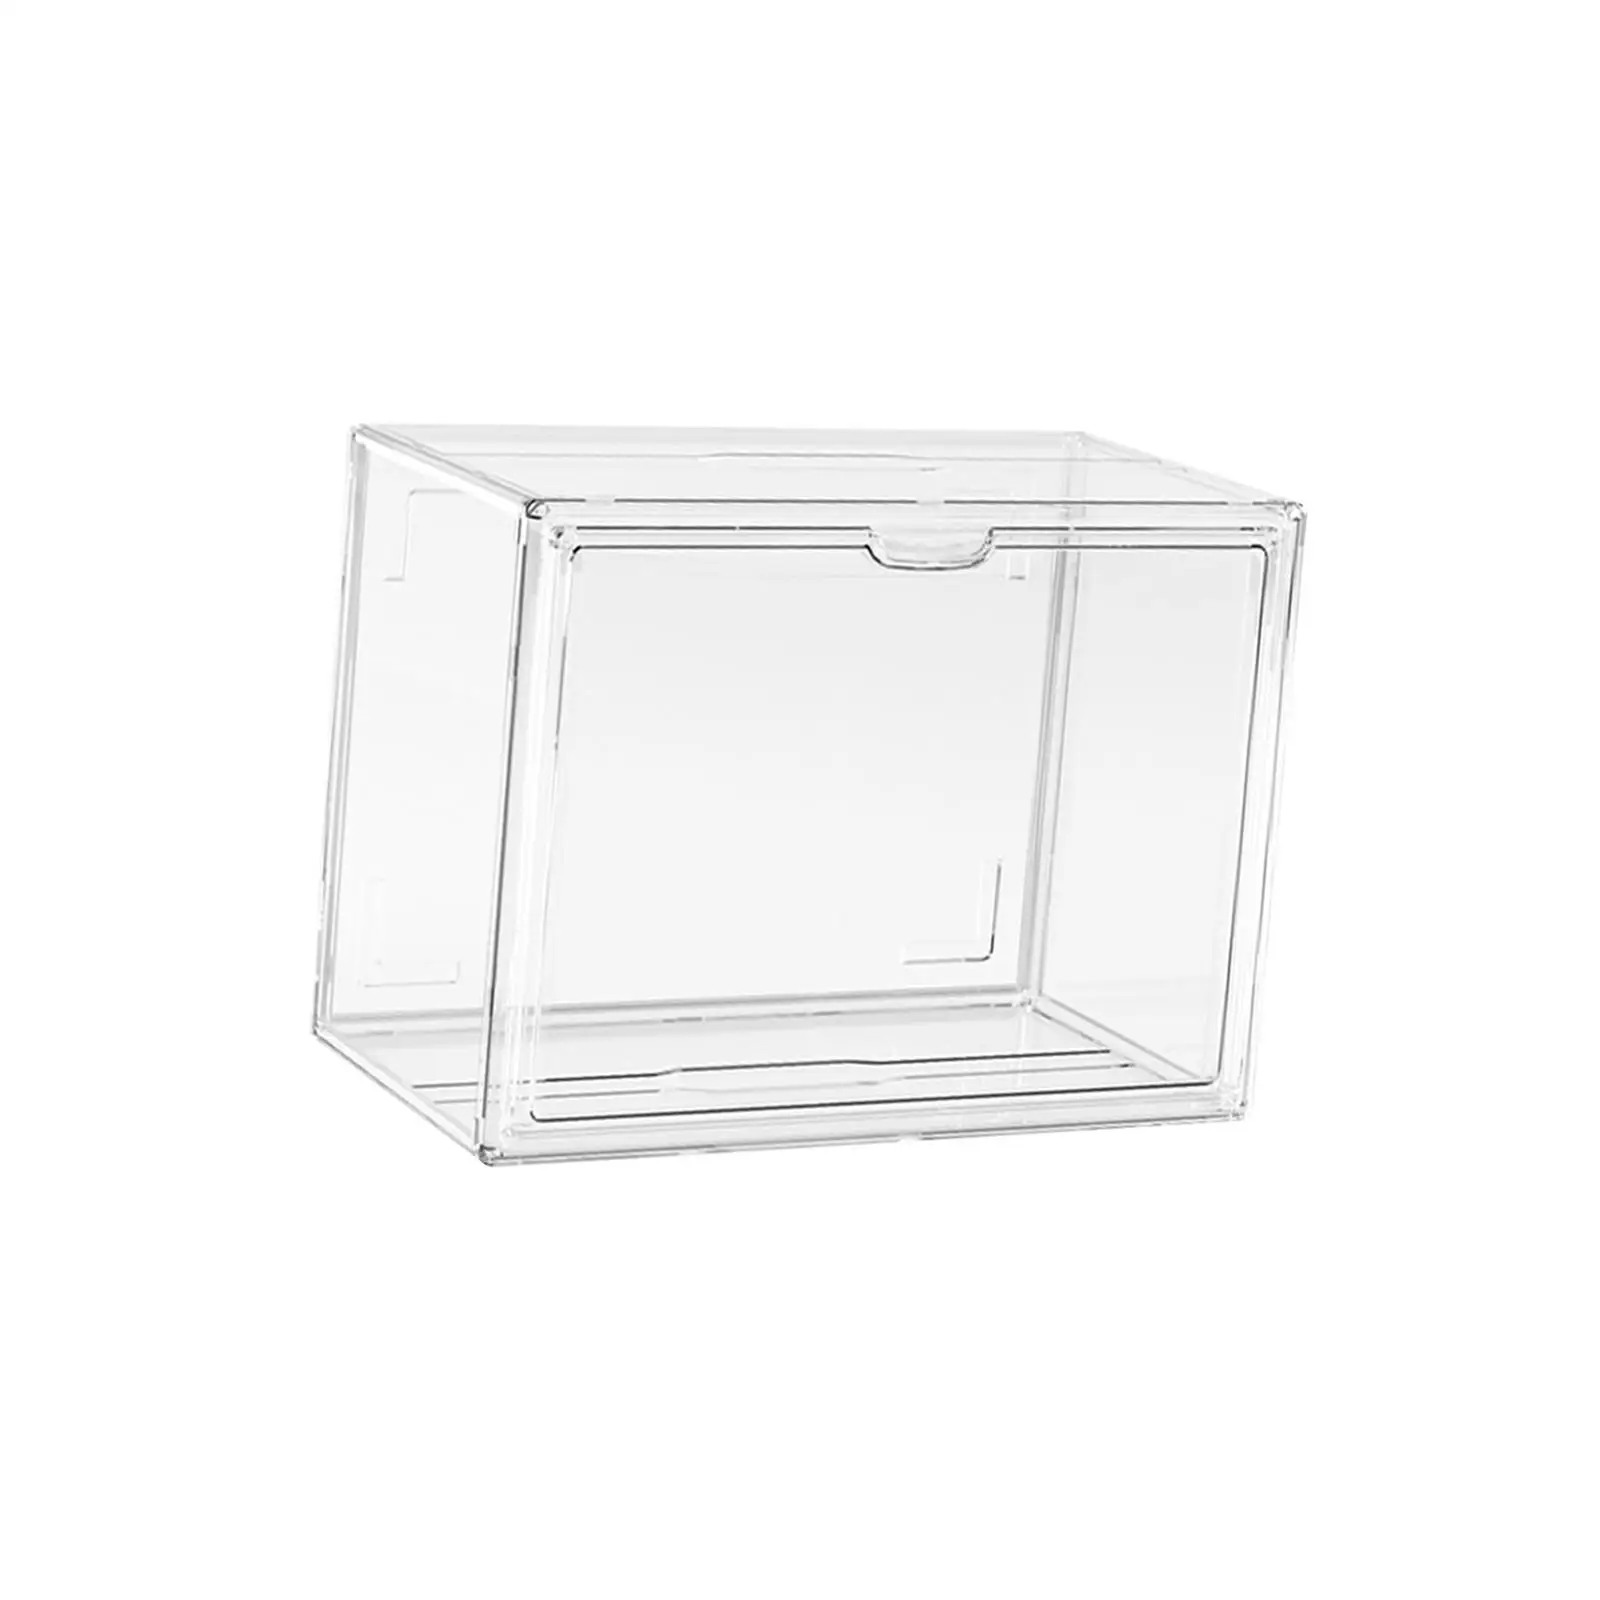 Display Case Dustproof Collectibles Display Showcase Display Box for Miniature Figurines